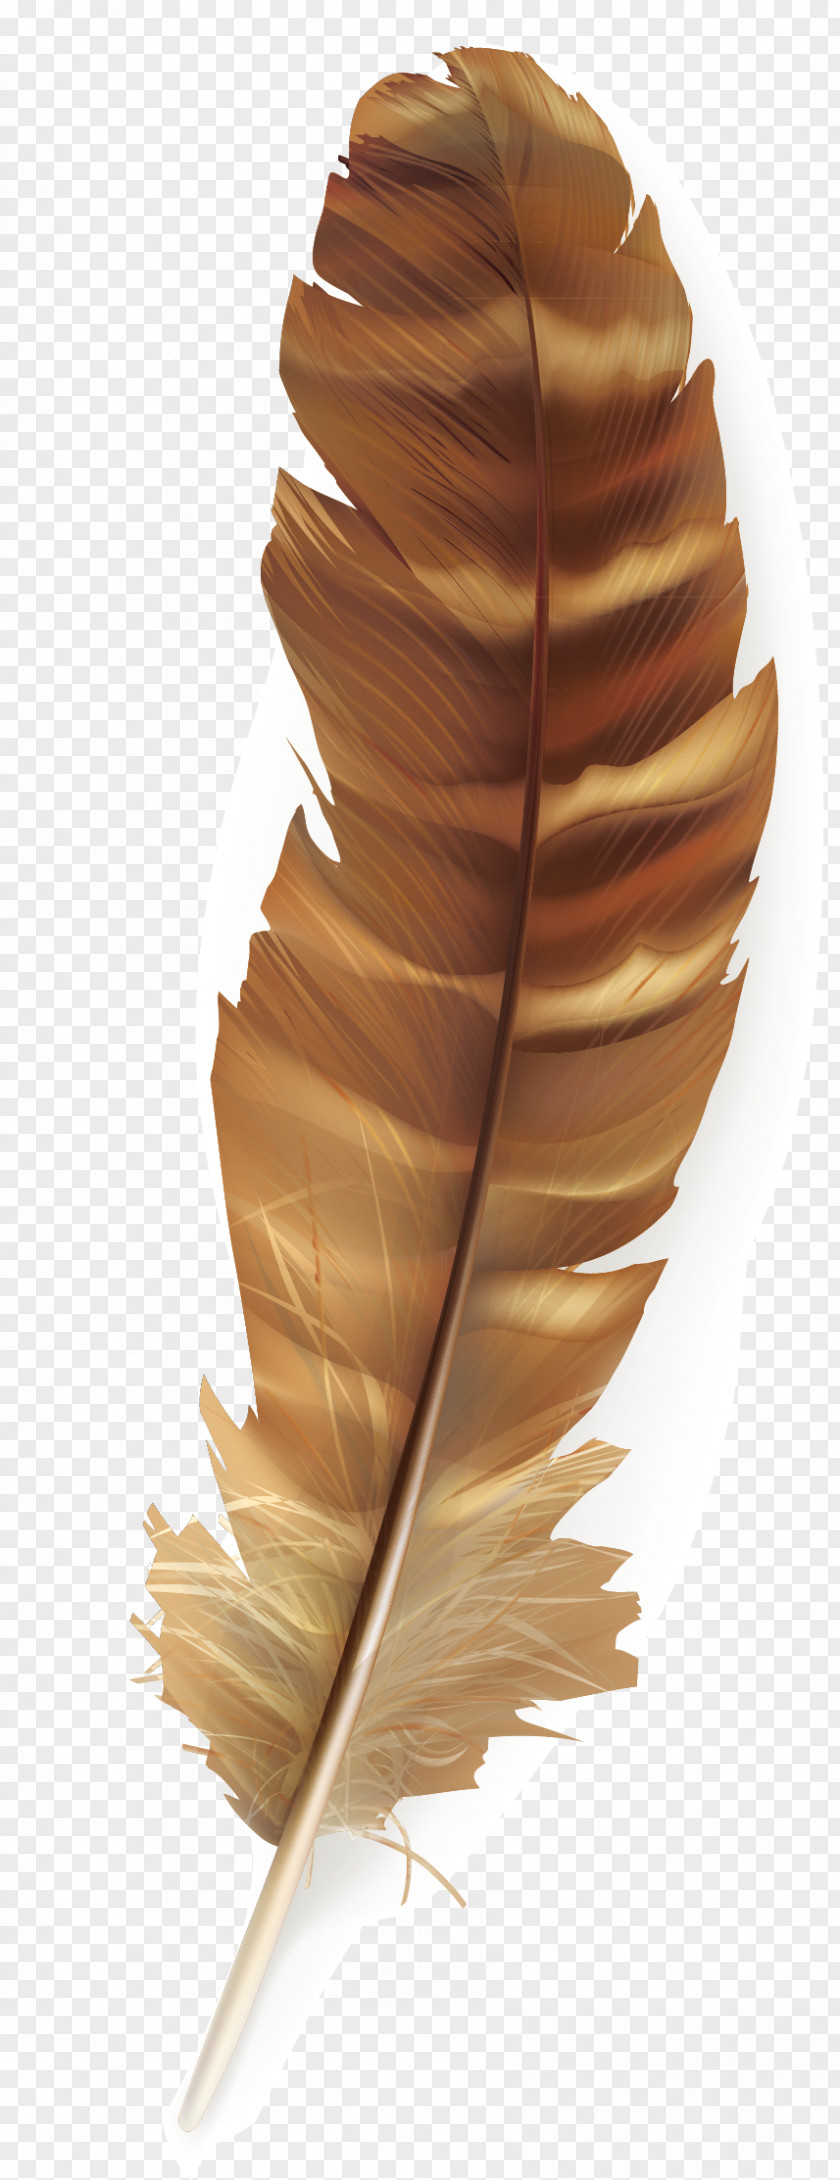 Brown Feathers Bird Feather Poster PNG